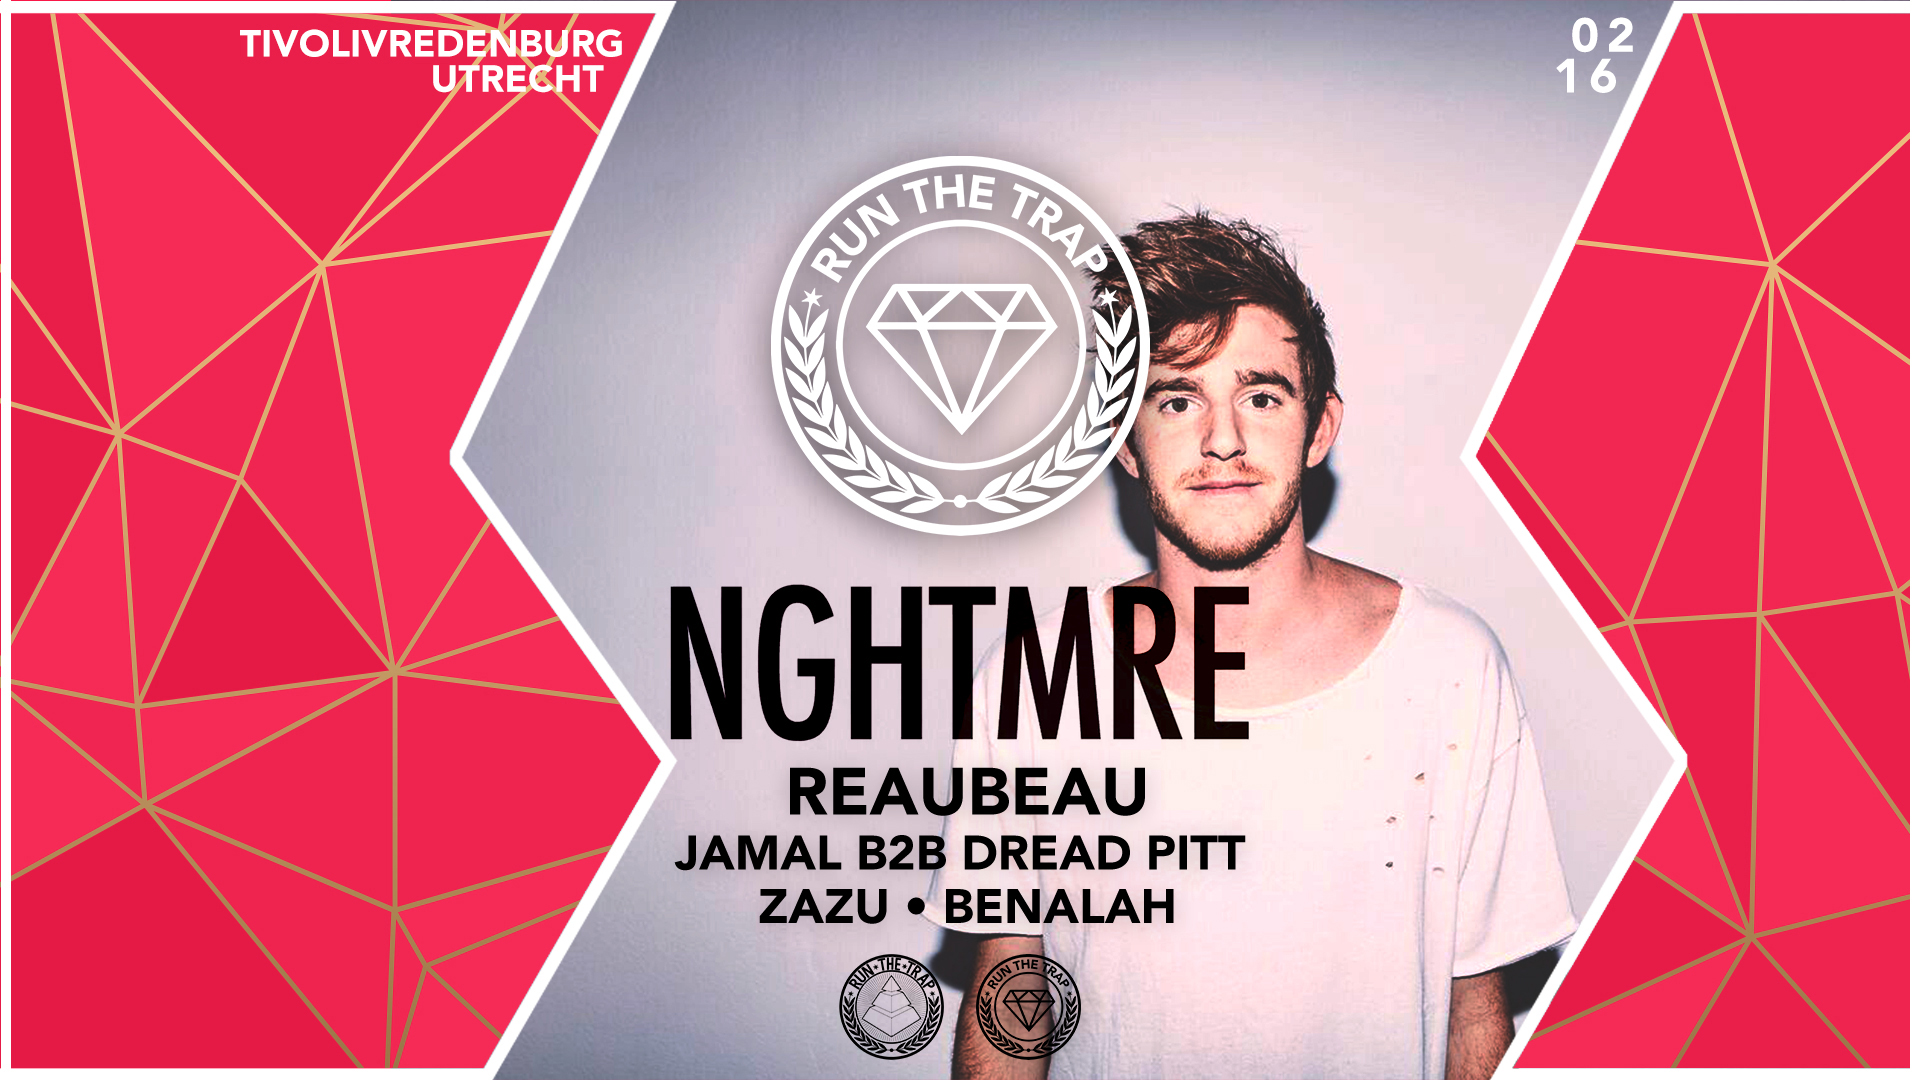 NGHTMRE is coming to Netherlands